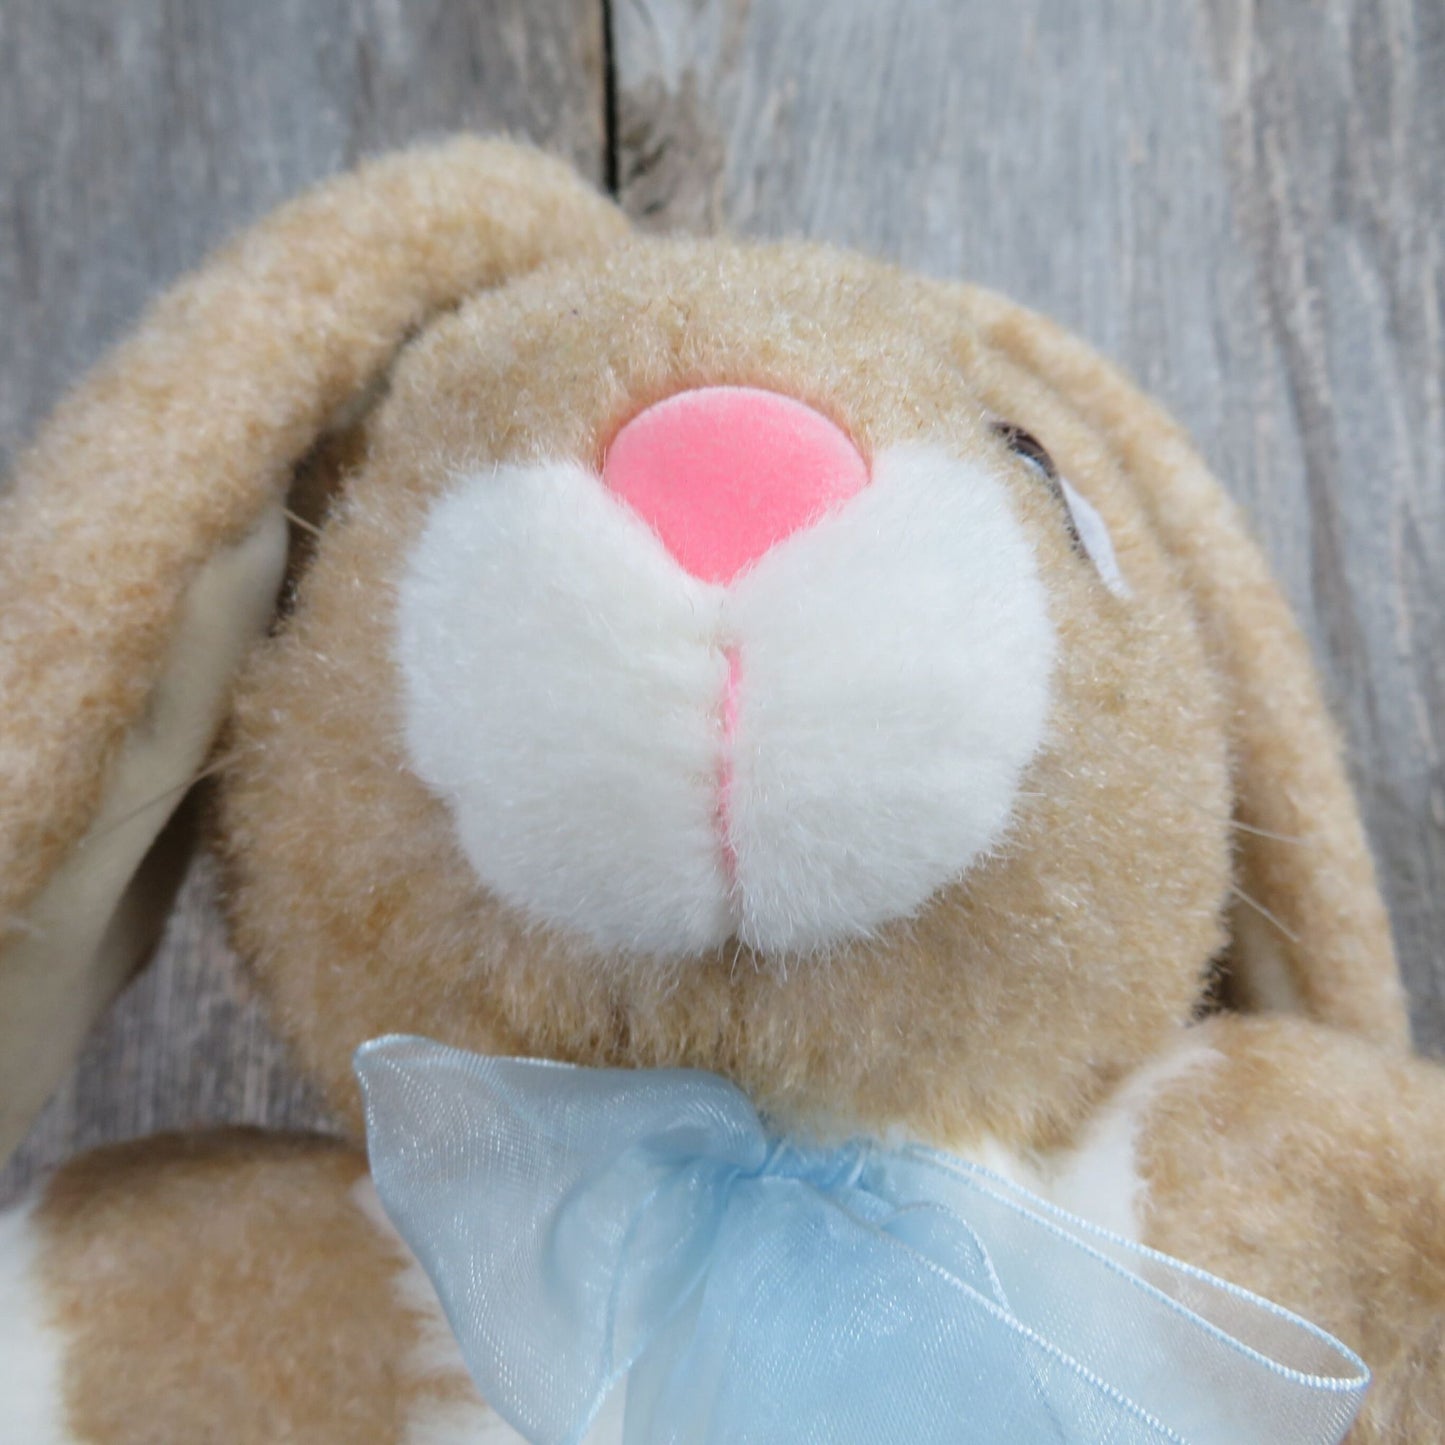 Vintage Bunny Rabbit Plush Beige Brown with Blue Bow Hard Stuffed Animal Plastic Eyes and Flocked Nose Easter